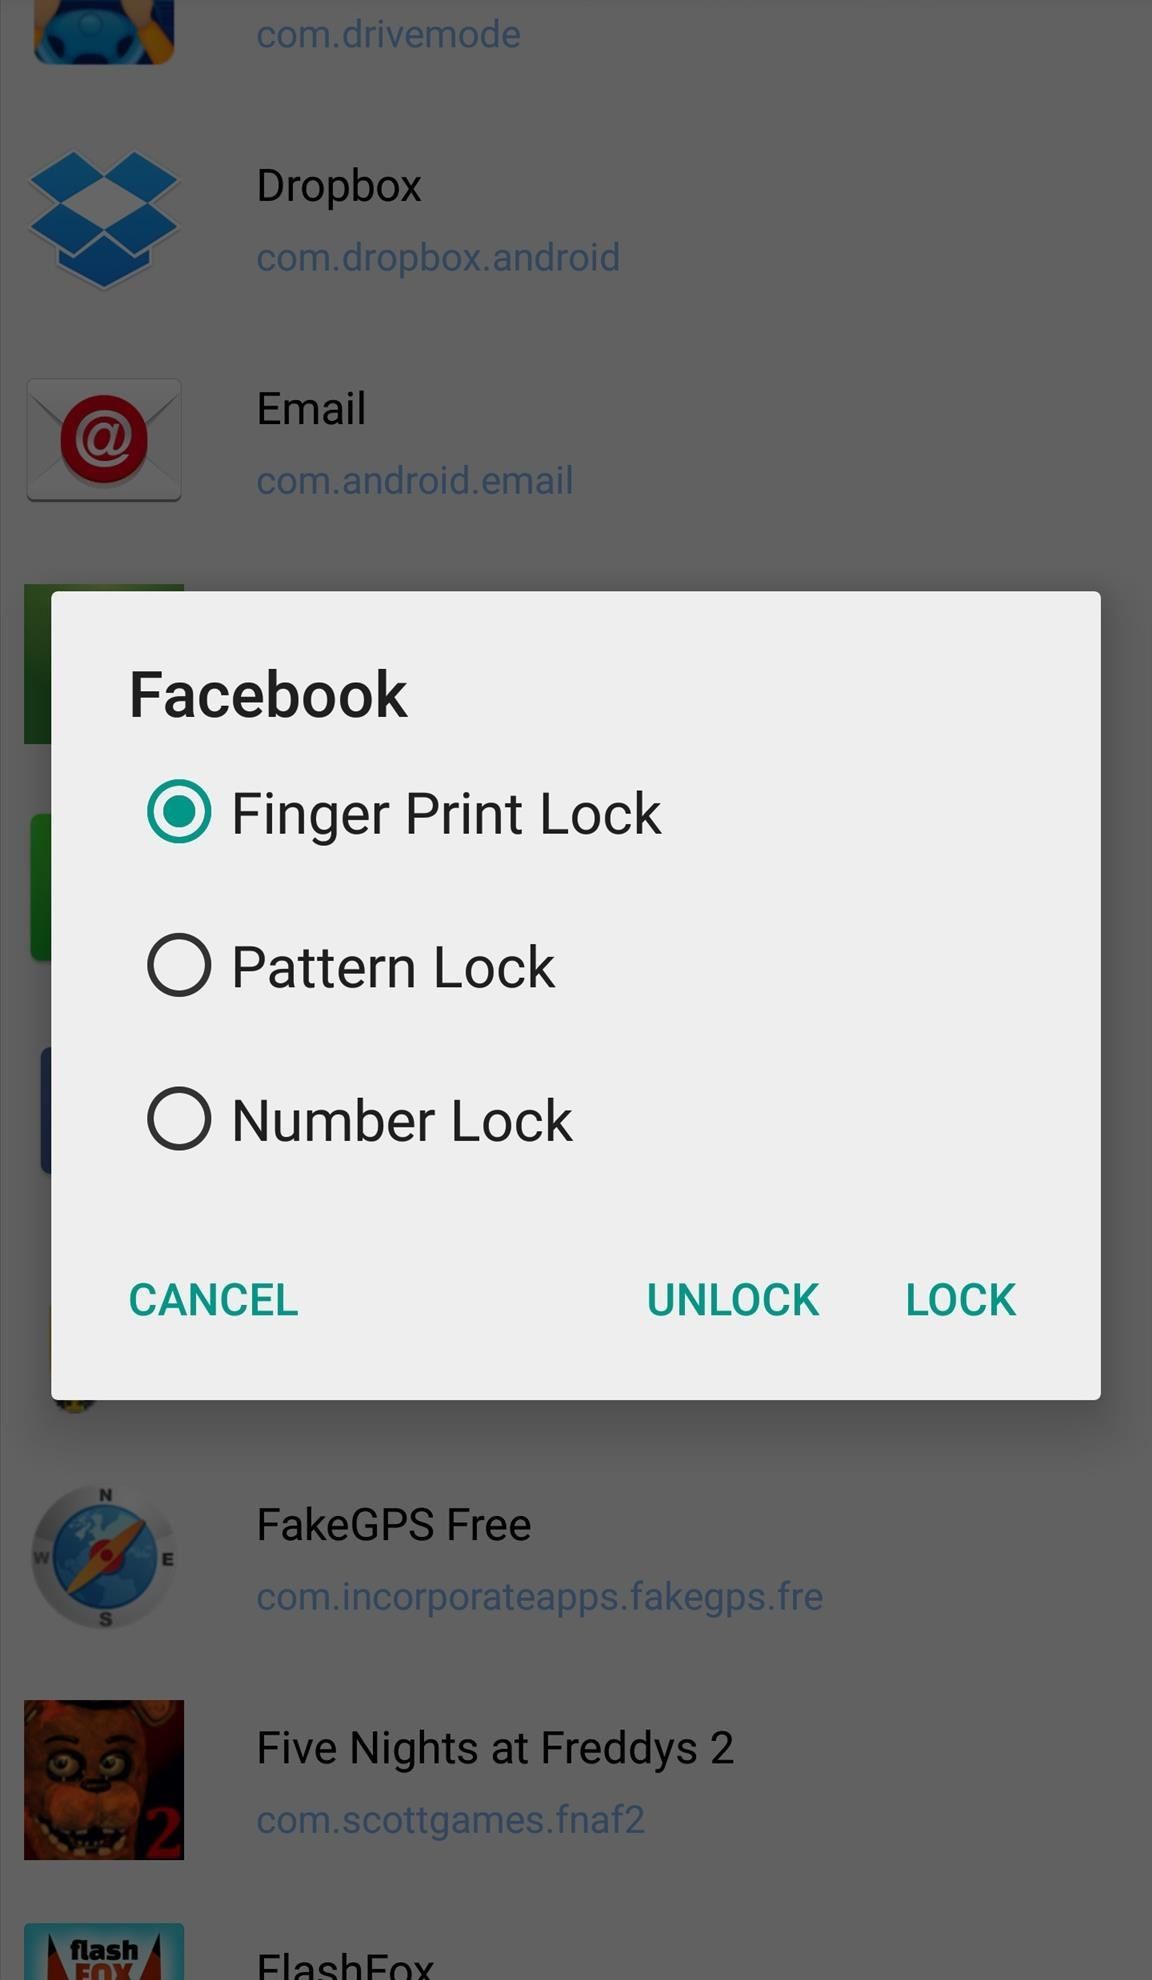 How to Fingerprint-Lock Apps on Android Without a Fingerprint Scanner